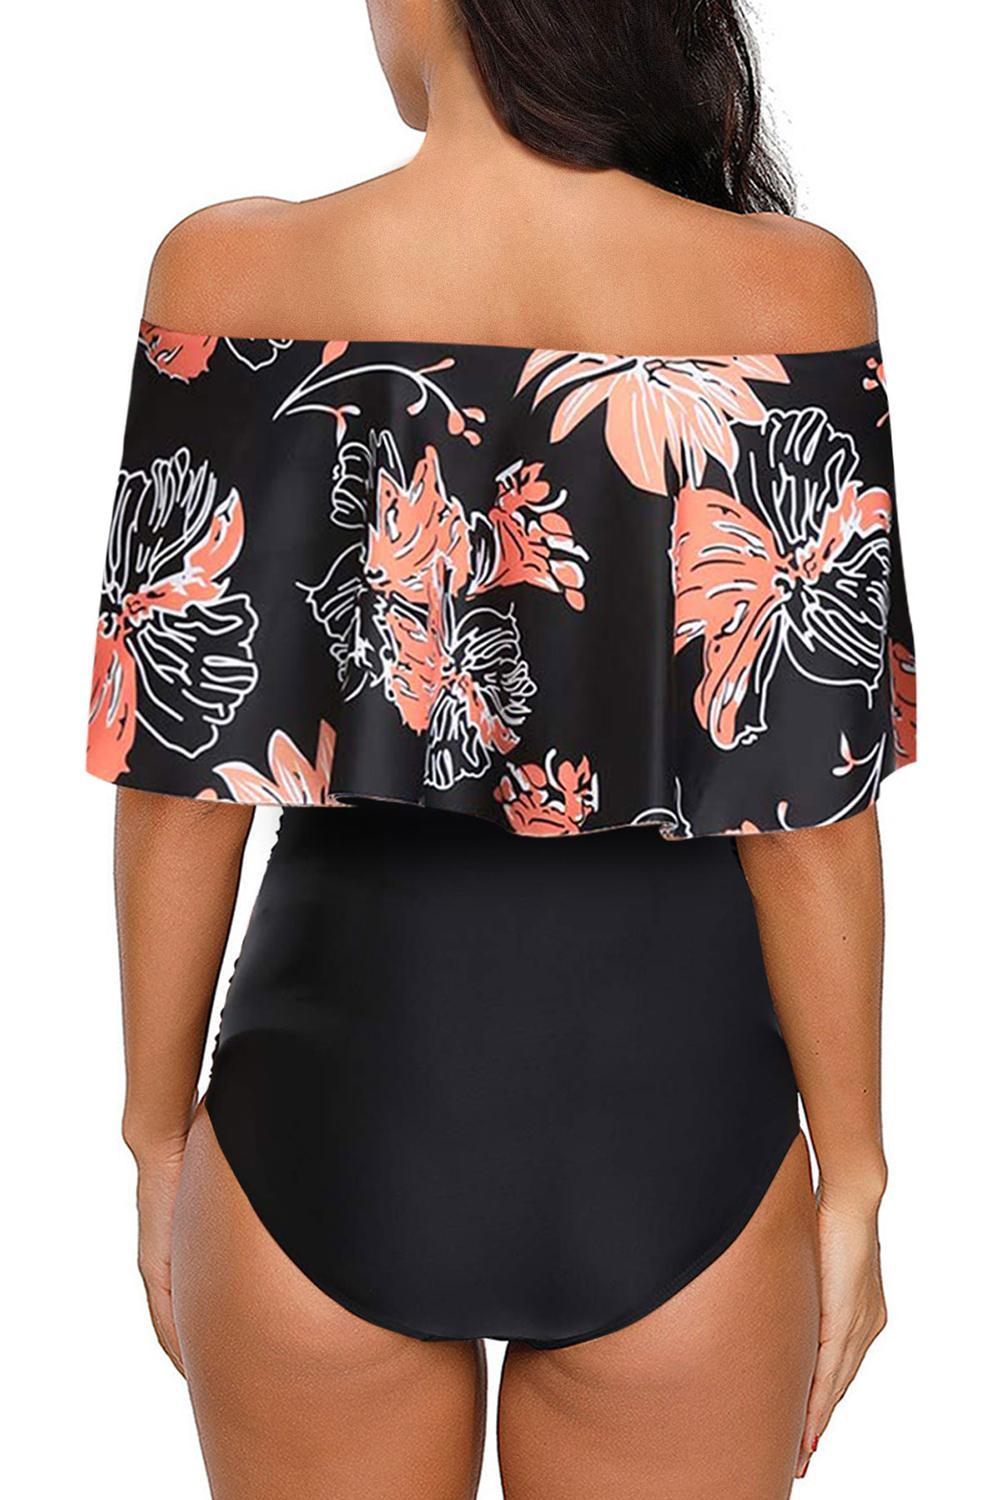 Black Floral Printed Off Shoulder Flounce Overlay One-piece Swimwear